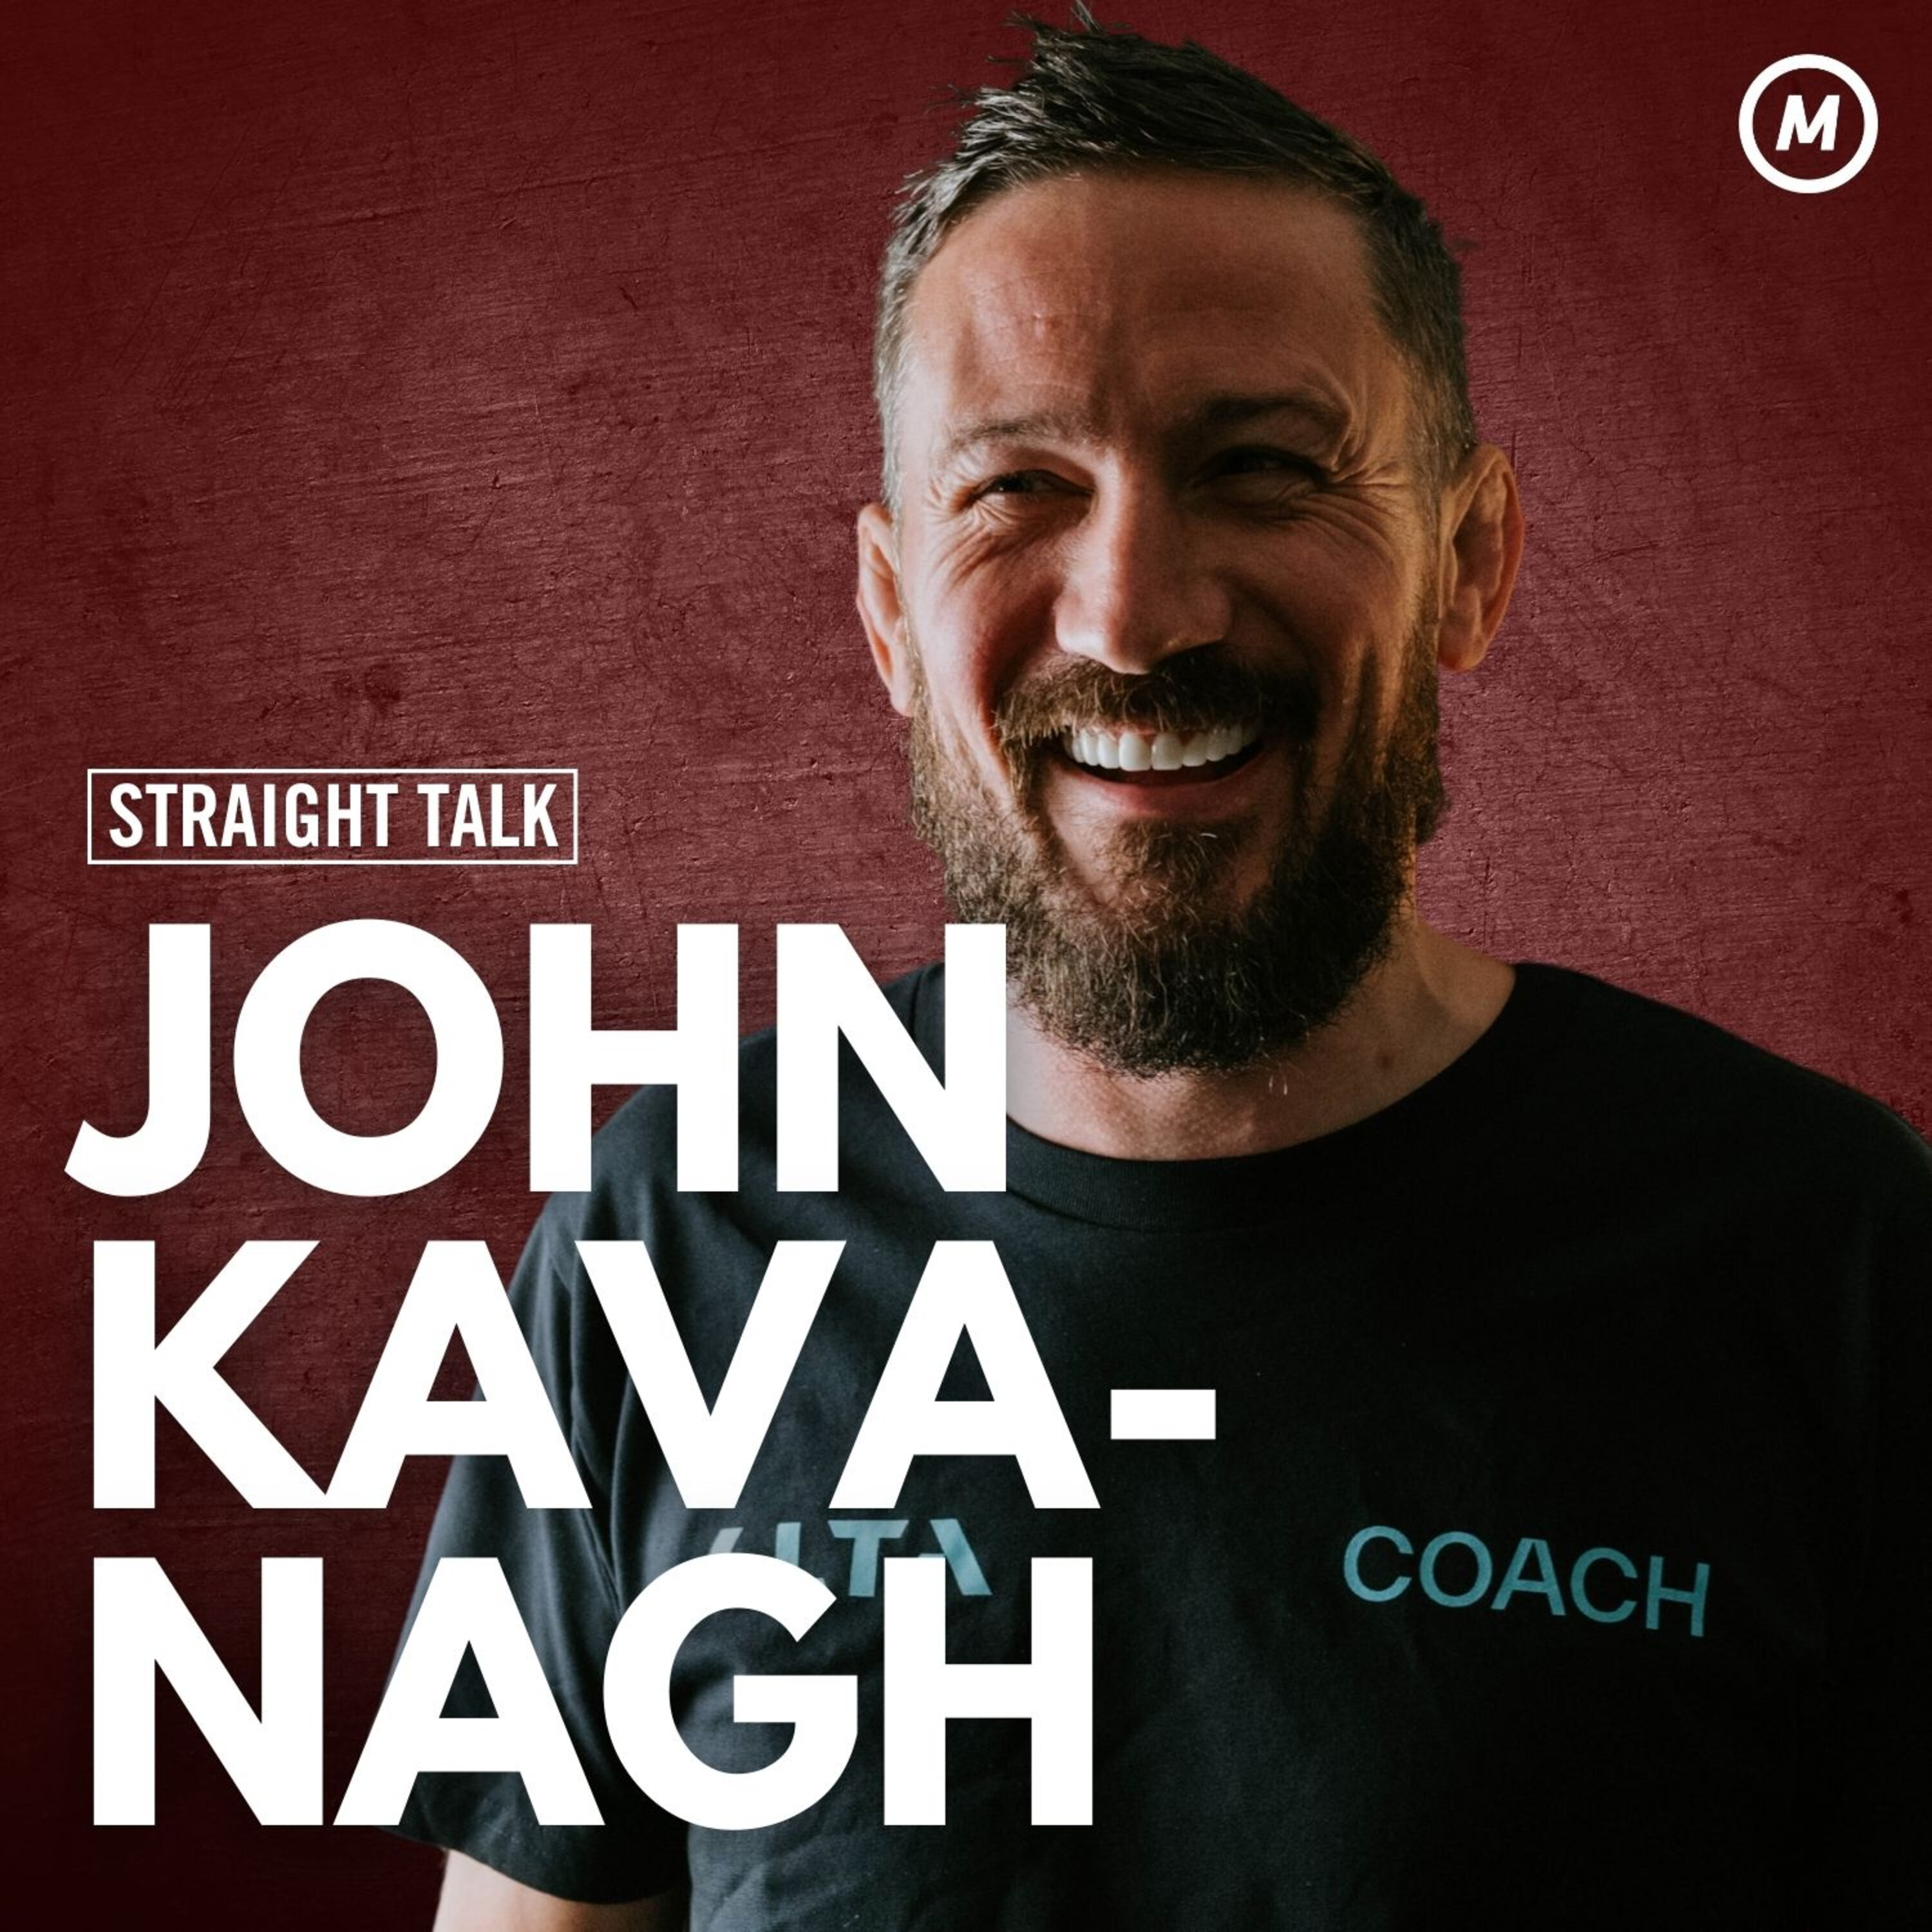 #24 Failure is not fatal and success is not final with MMA coach John Kavanagh